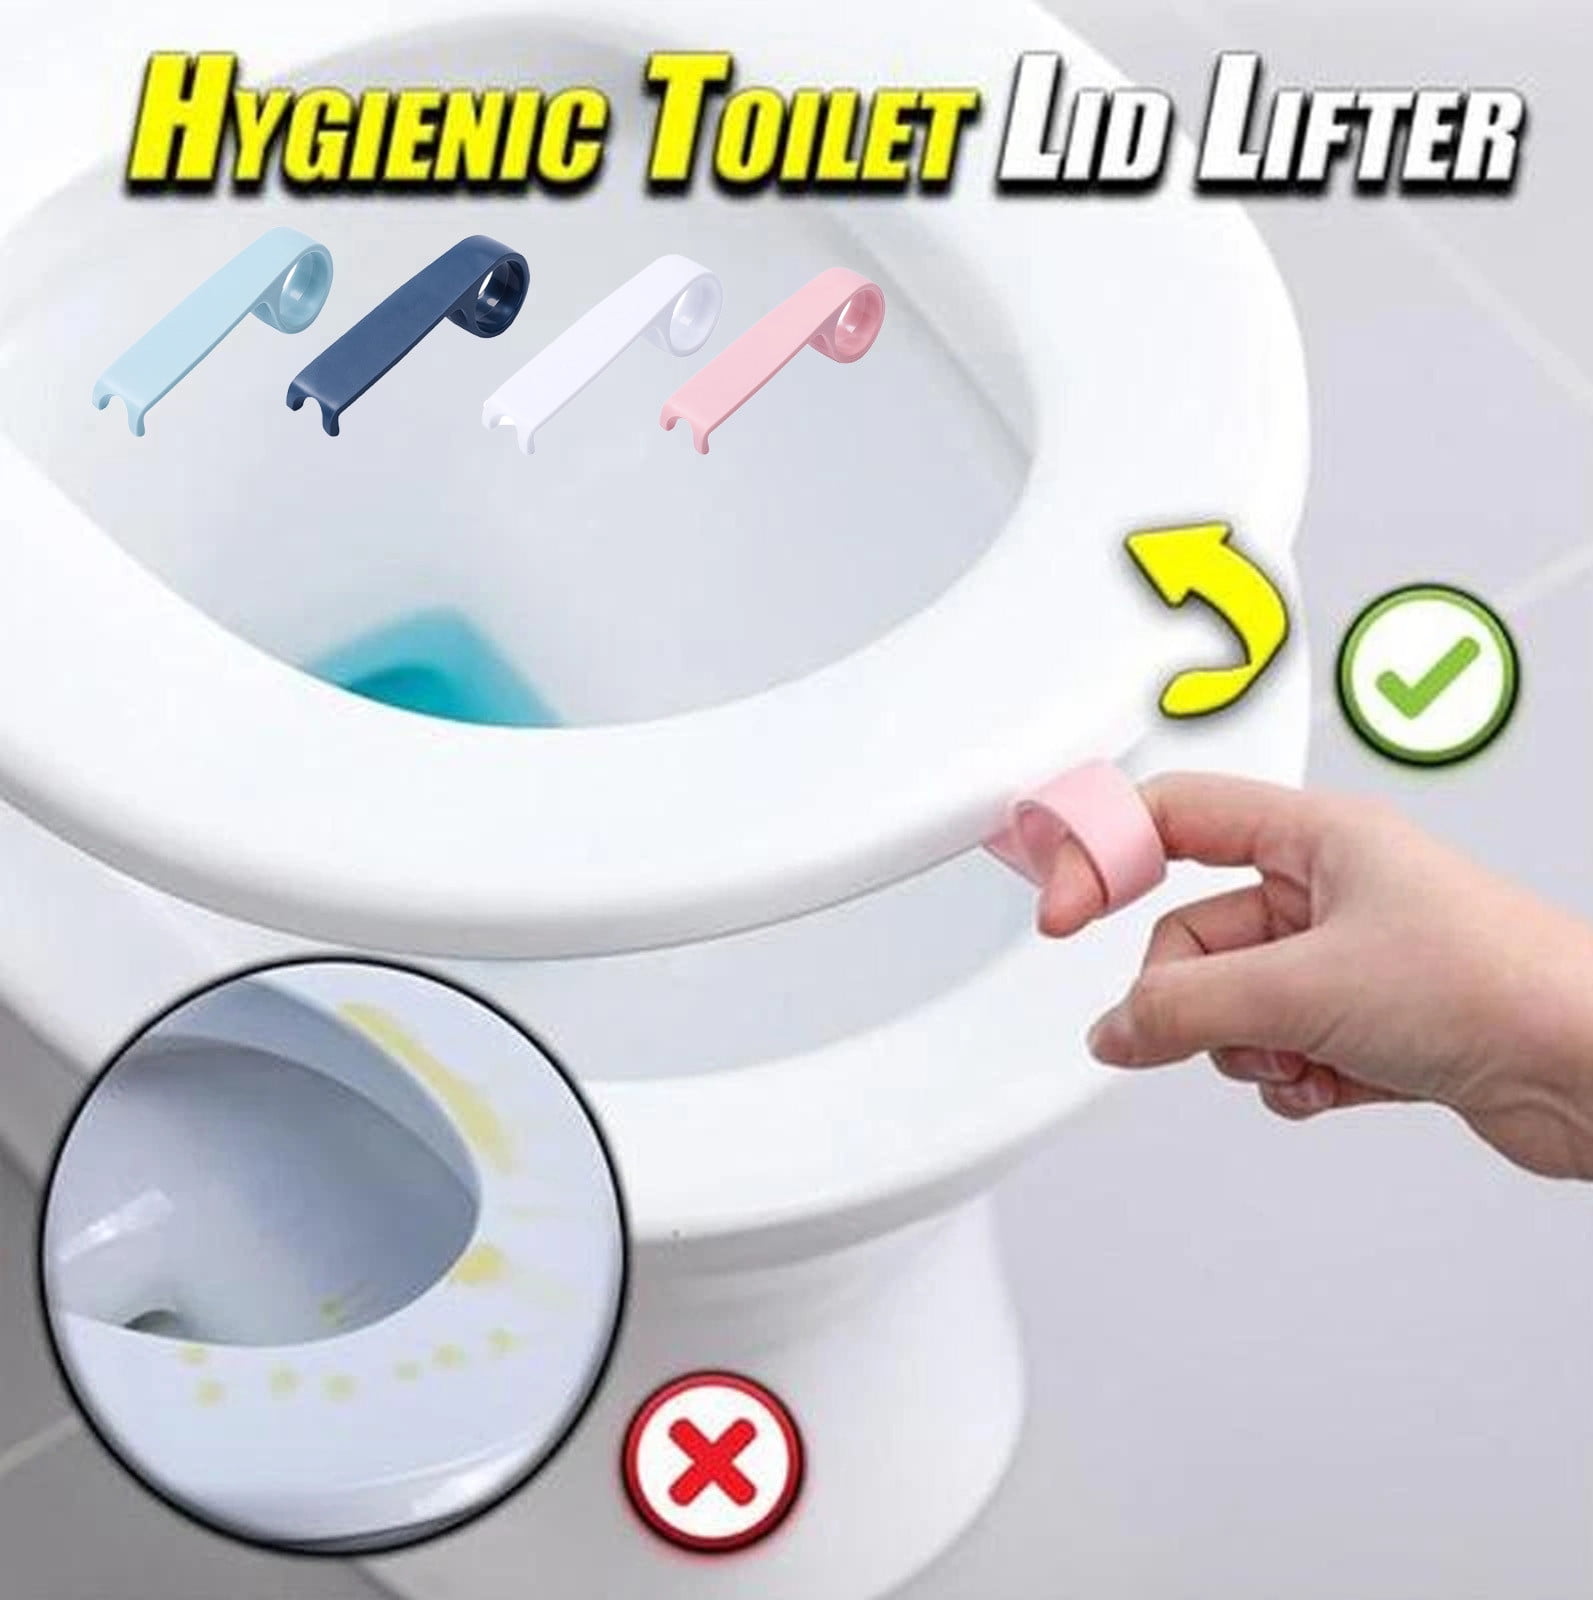 Wings Toilet Cover Lifter Seat Lifting Handle Portable Anti Dirt Lift Raise CO 